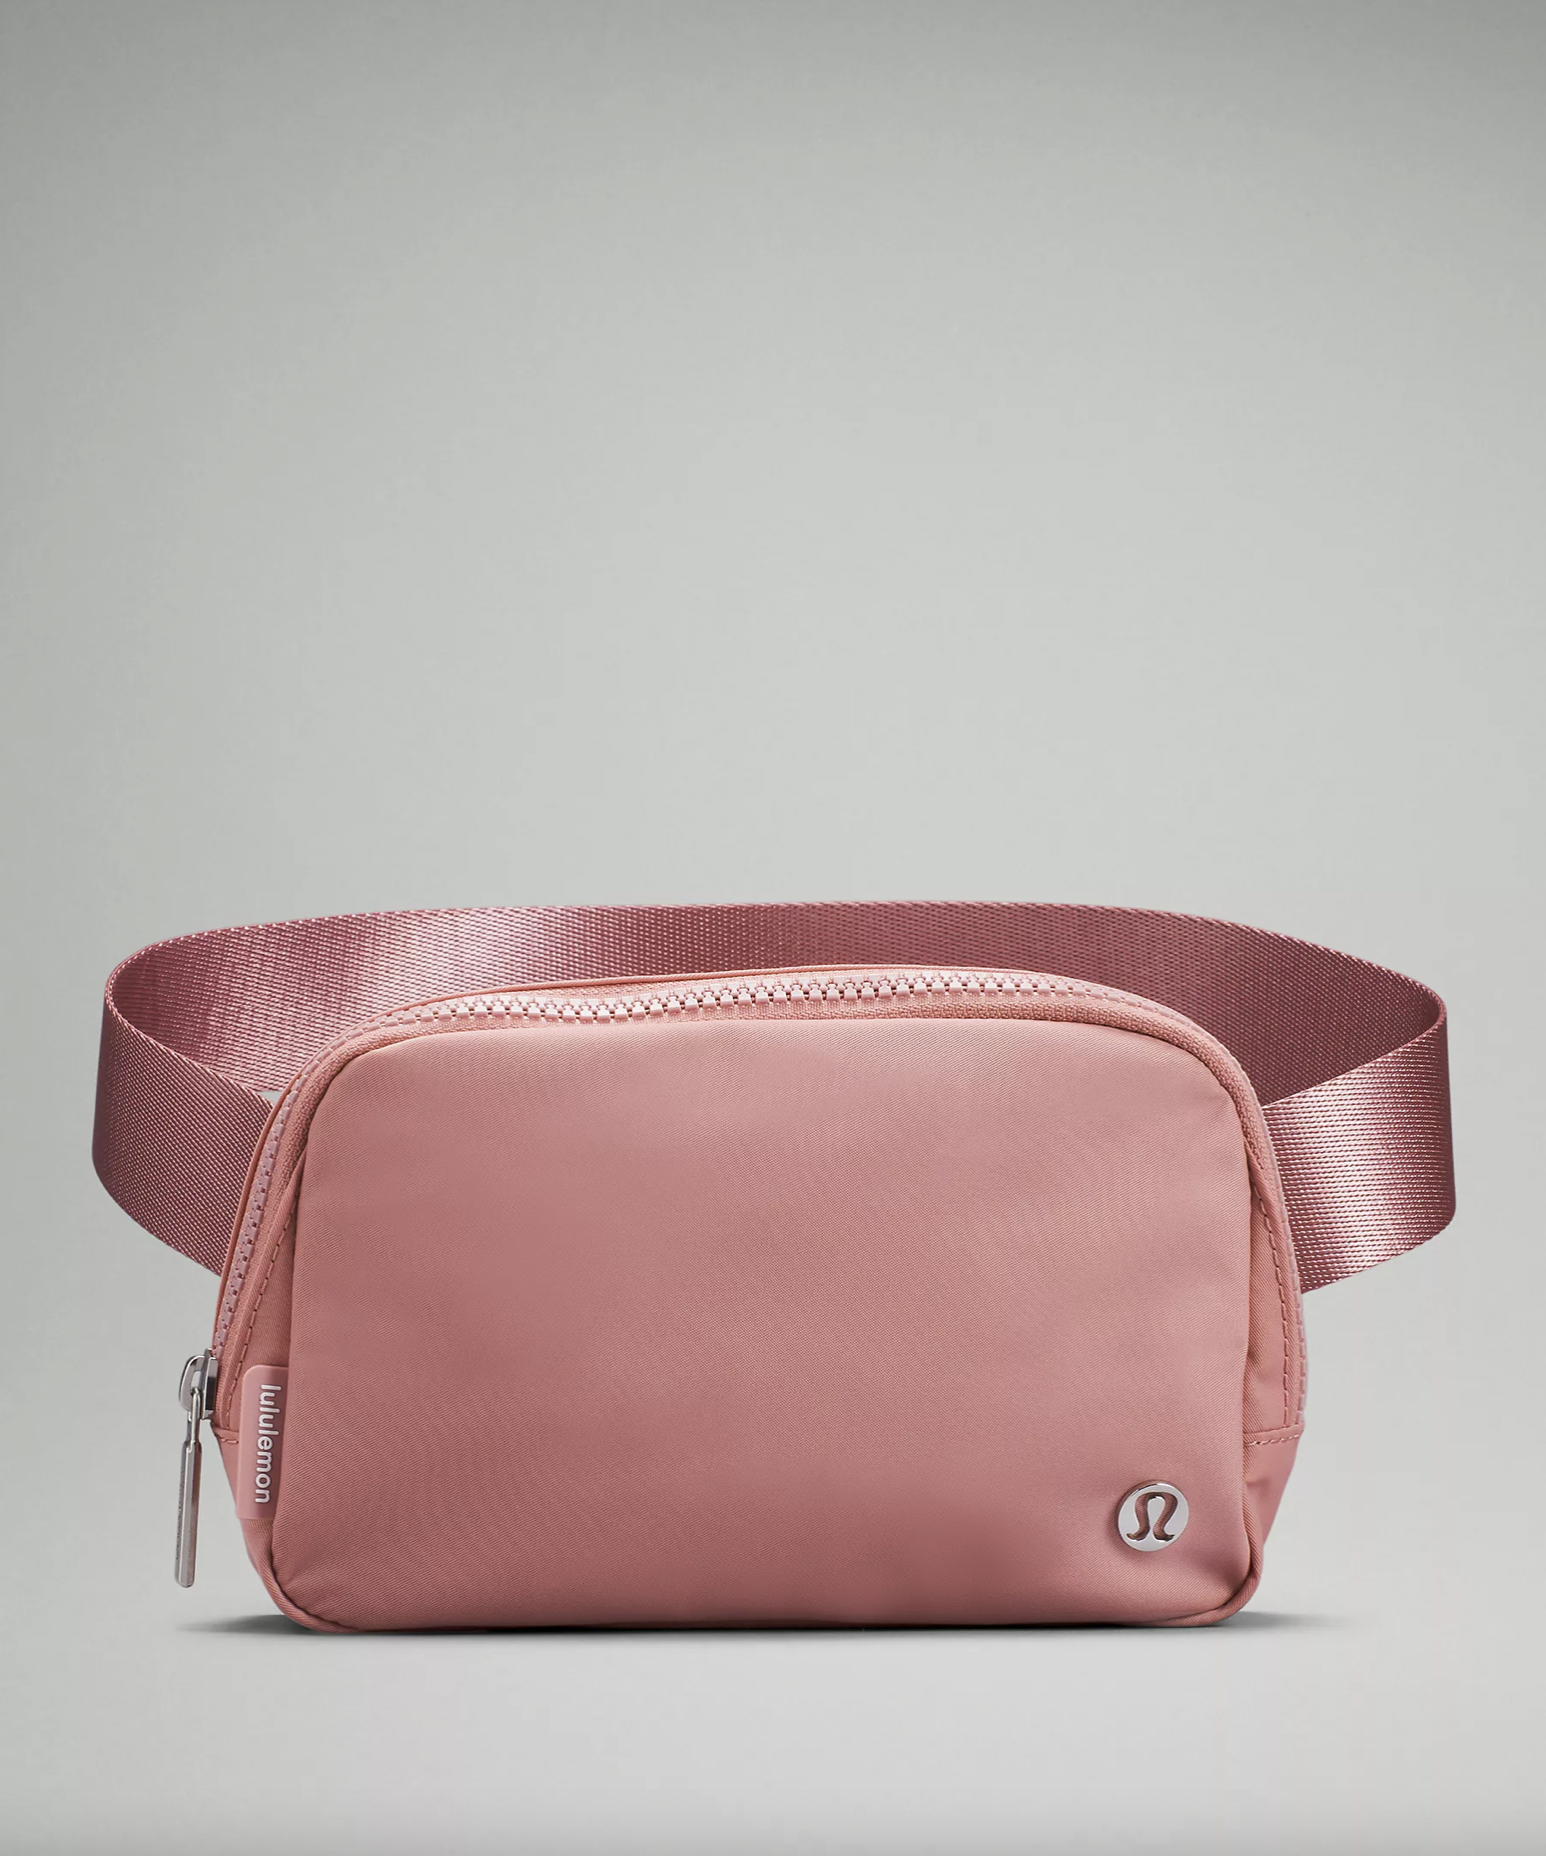 Dont Wait Lululemons Popular Everywhere Belt Bag Comes in New Colors